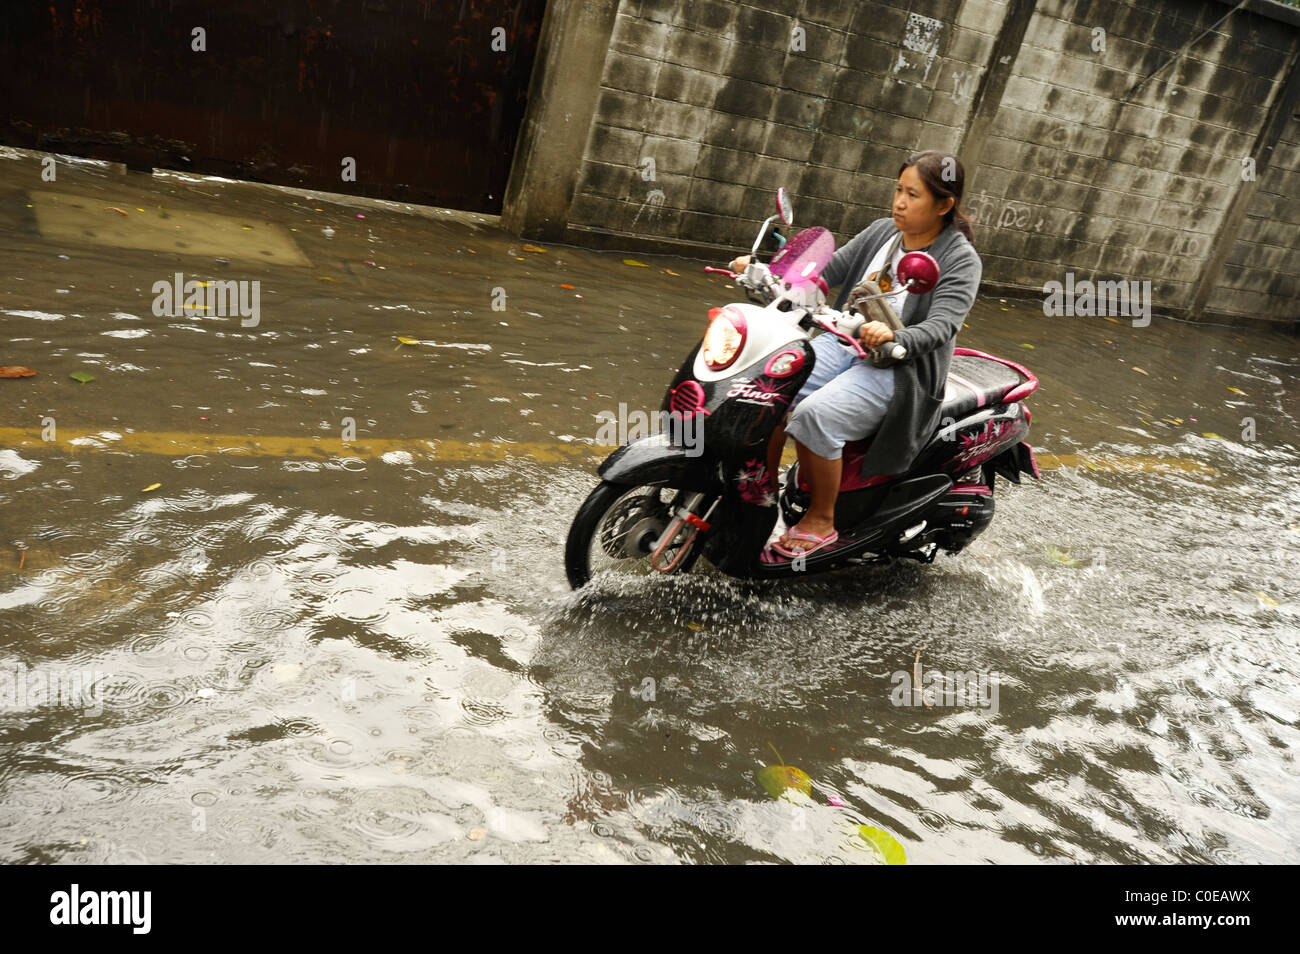 a rainy day in bangkok ( crazy flooded street), everyday life in the big mango, strange weather situation Stock Photo